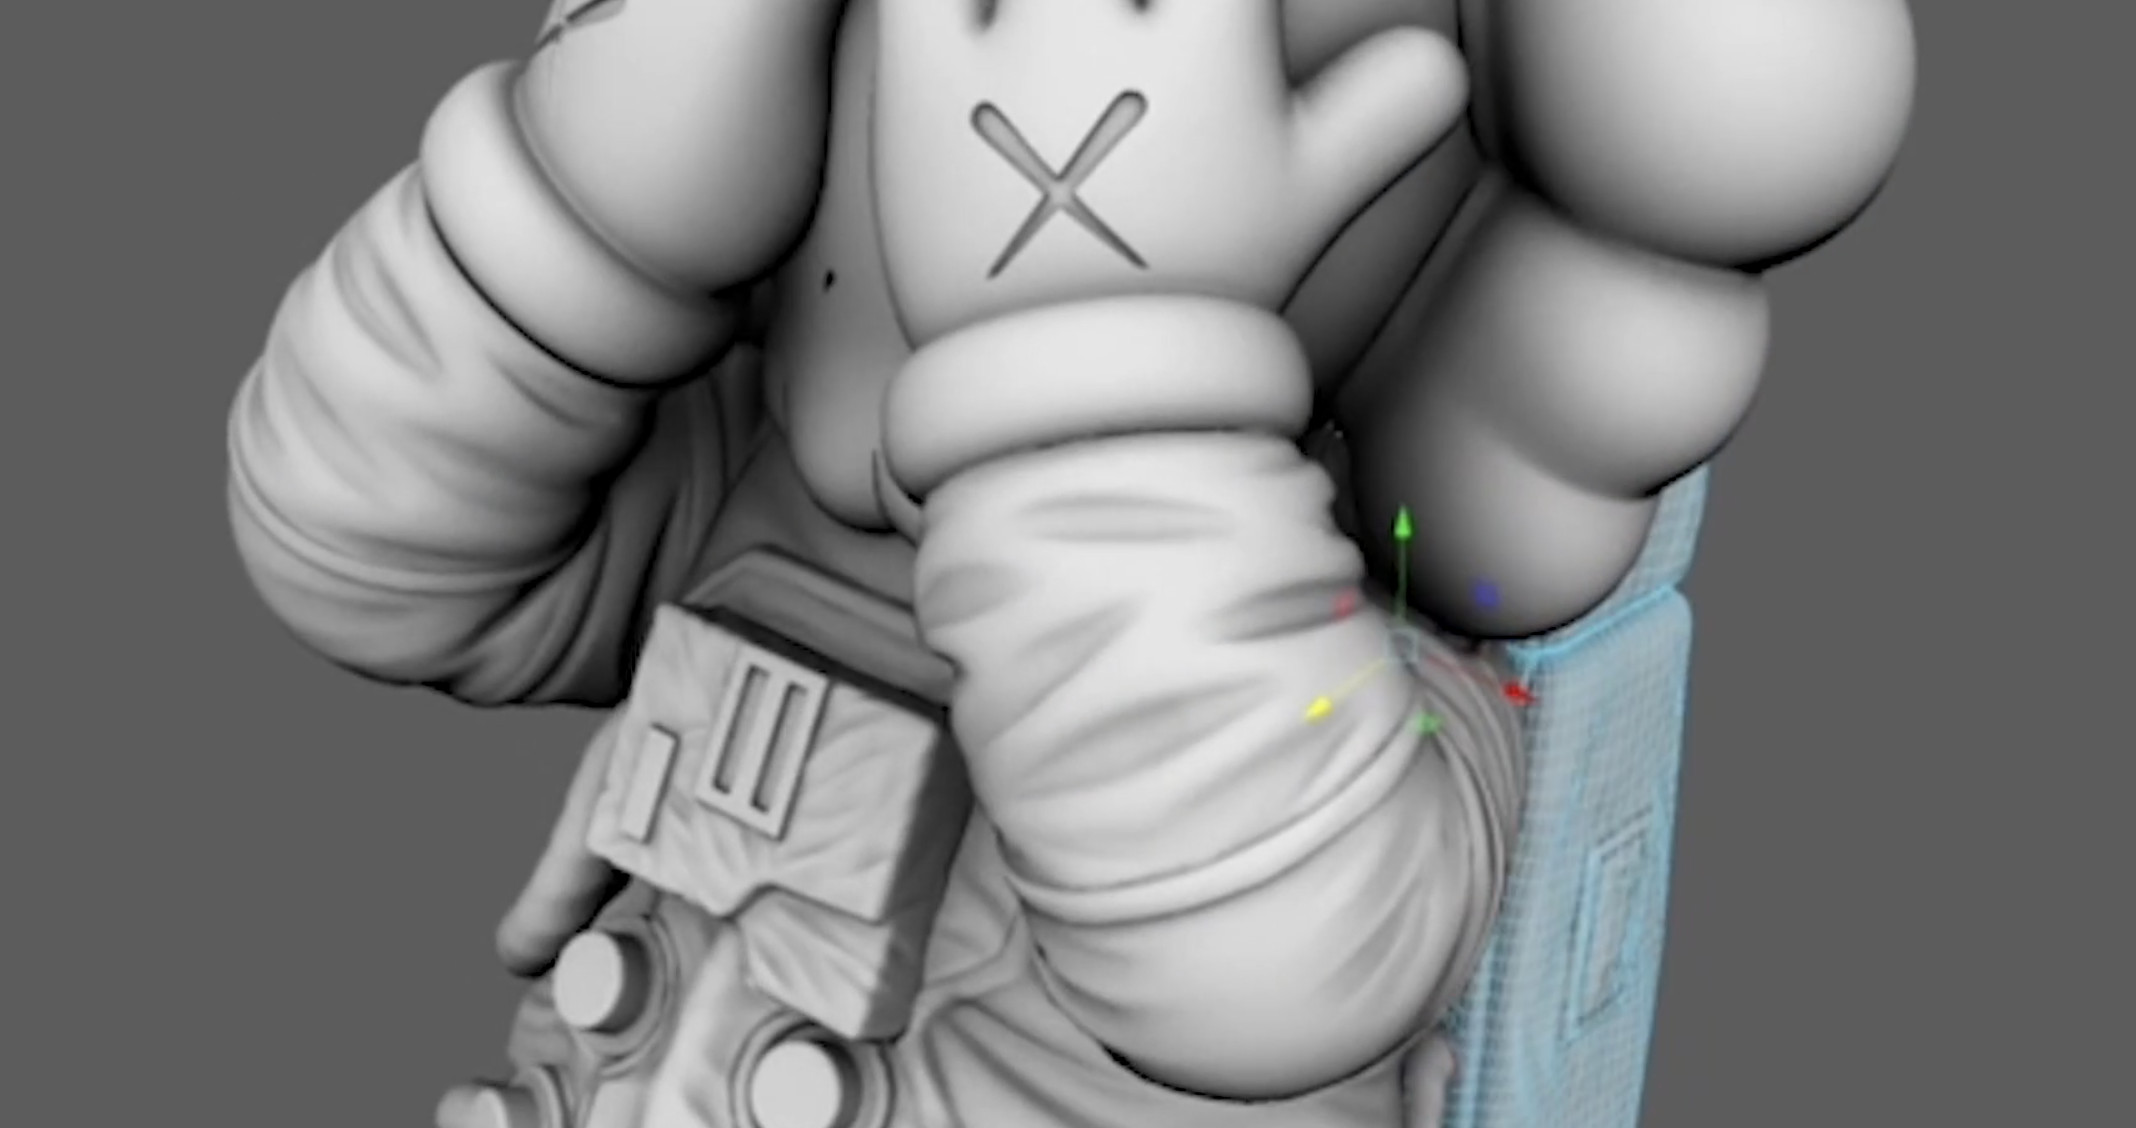 The development of KAWS's work for The Looking Glass. Image courtesy of Frieze